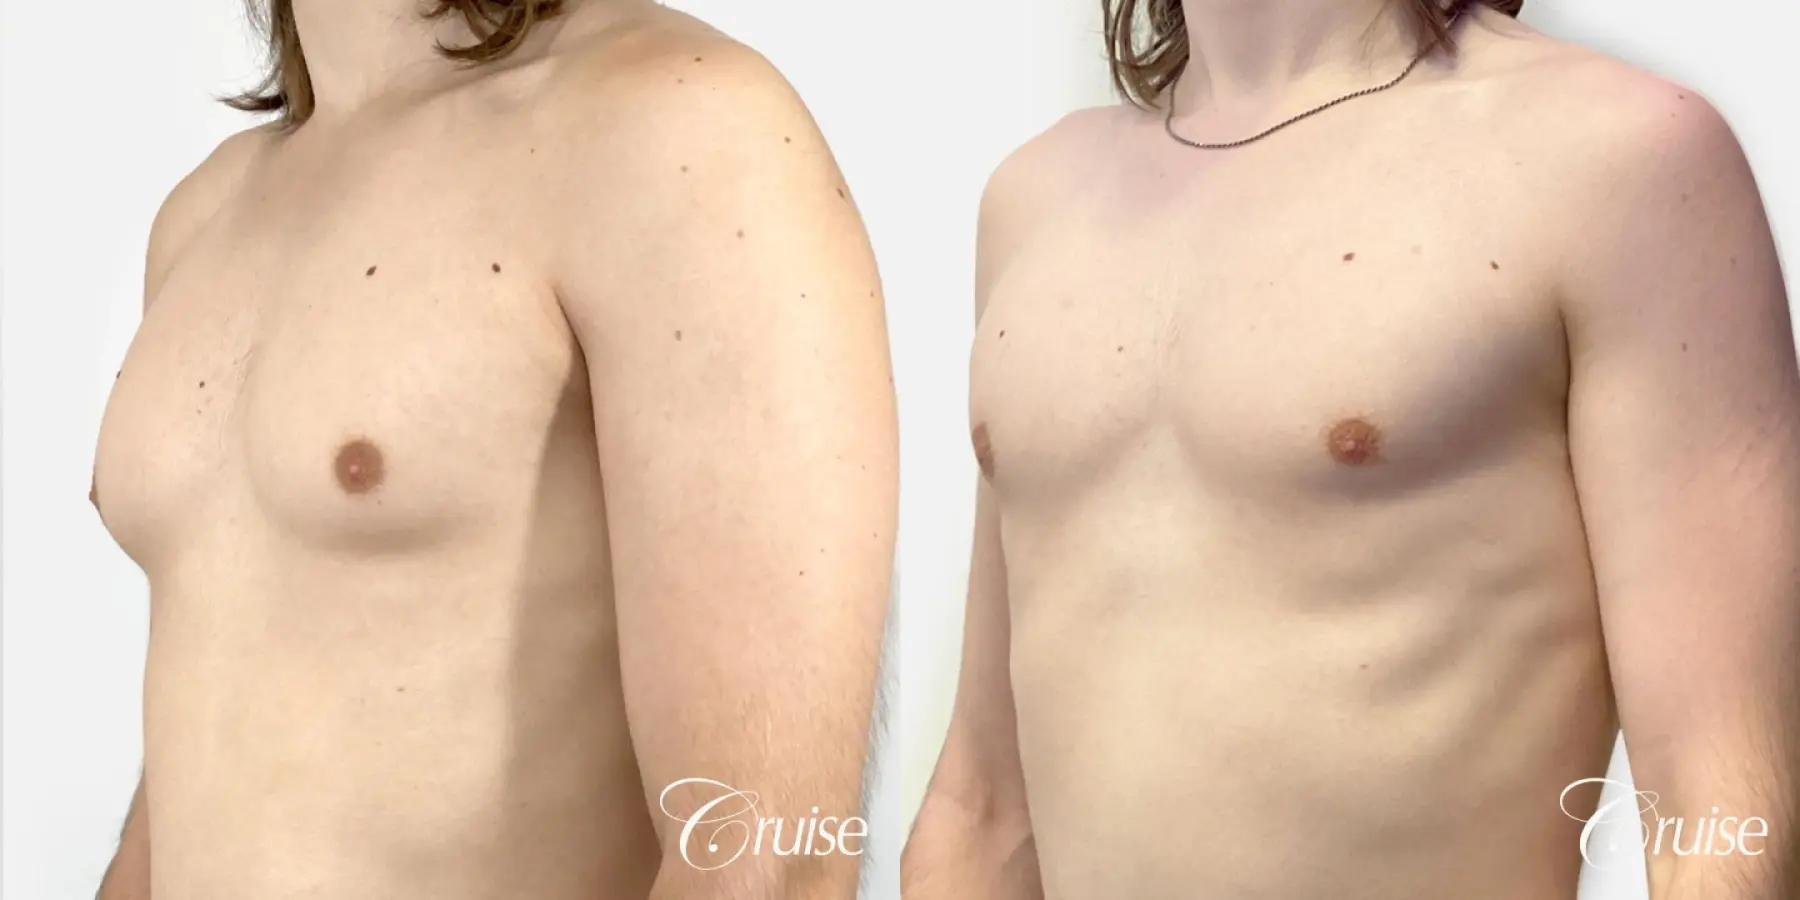 Type 1 Gynecomastia Removal - Before and After 2